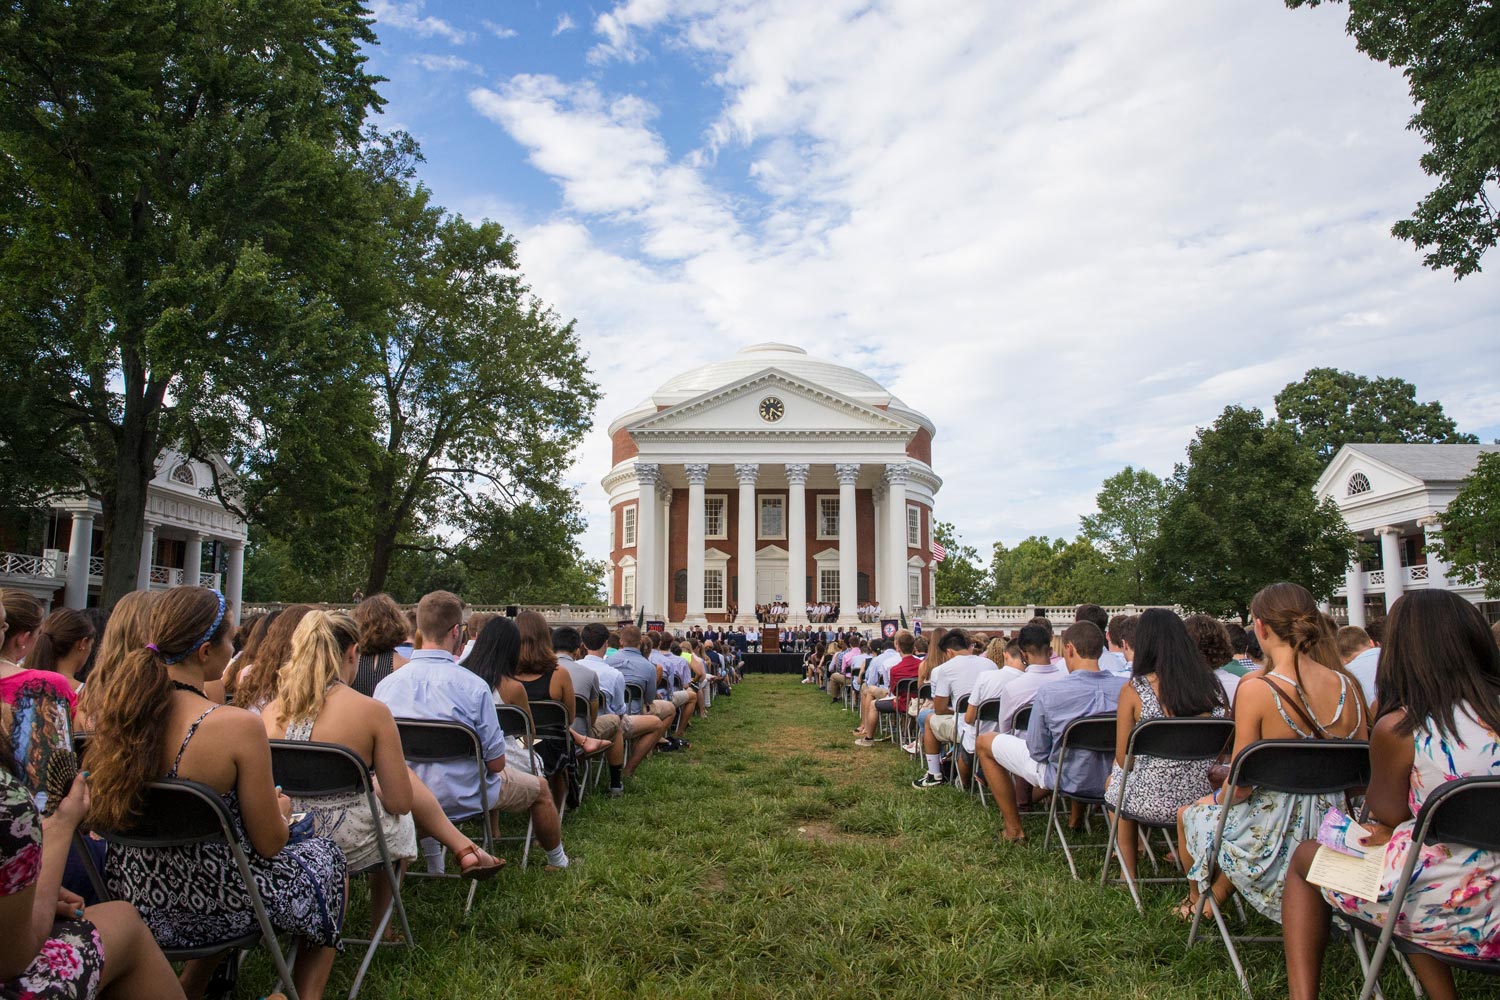 During Opening Convocation, students face the Rotunda. Four years later, they will face Old Cabell Hall at graduation, serving as a bookend to their careers at UVA. 